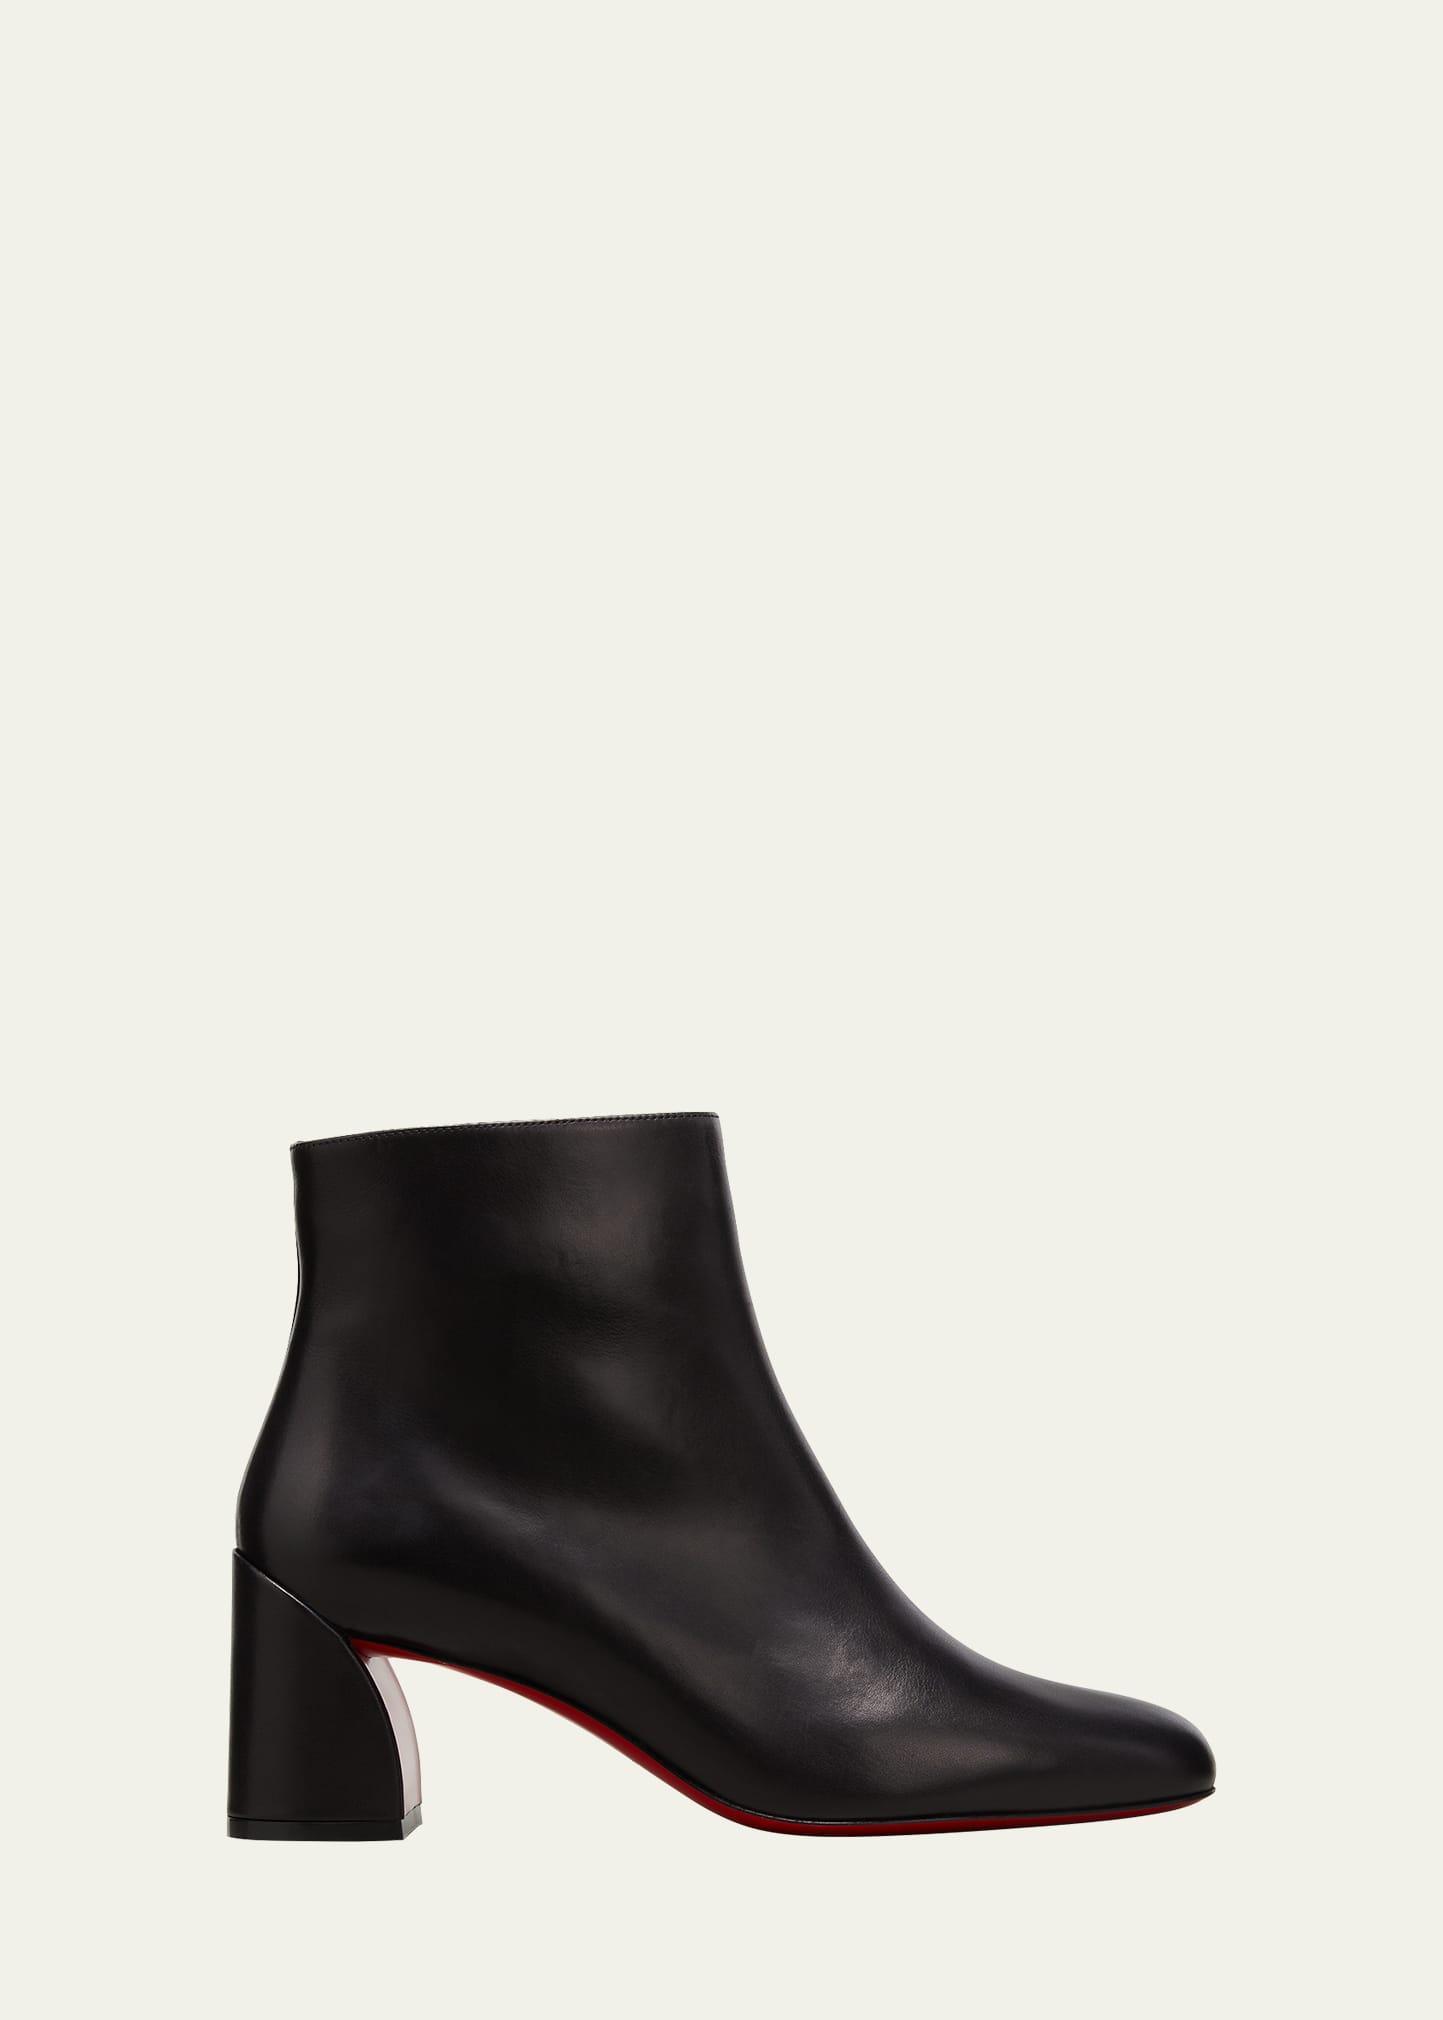 Christian Louboutin Turela Bootie in Black at Nordstrom, Size 6.5Us Product Image